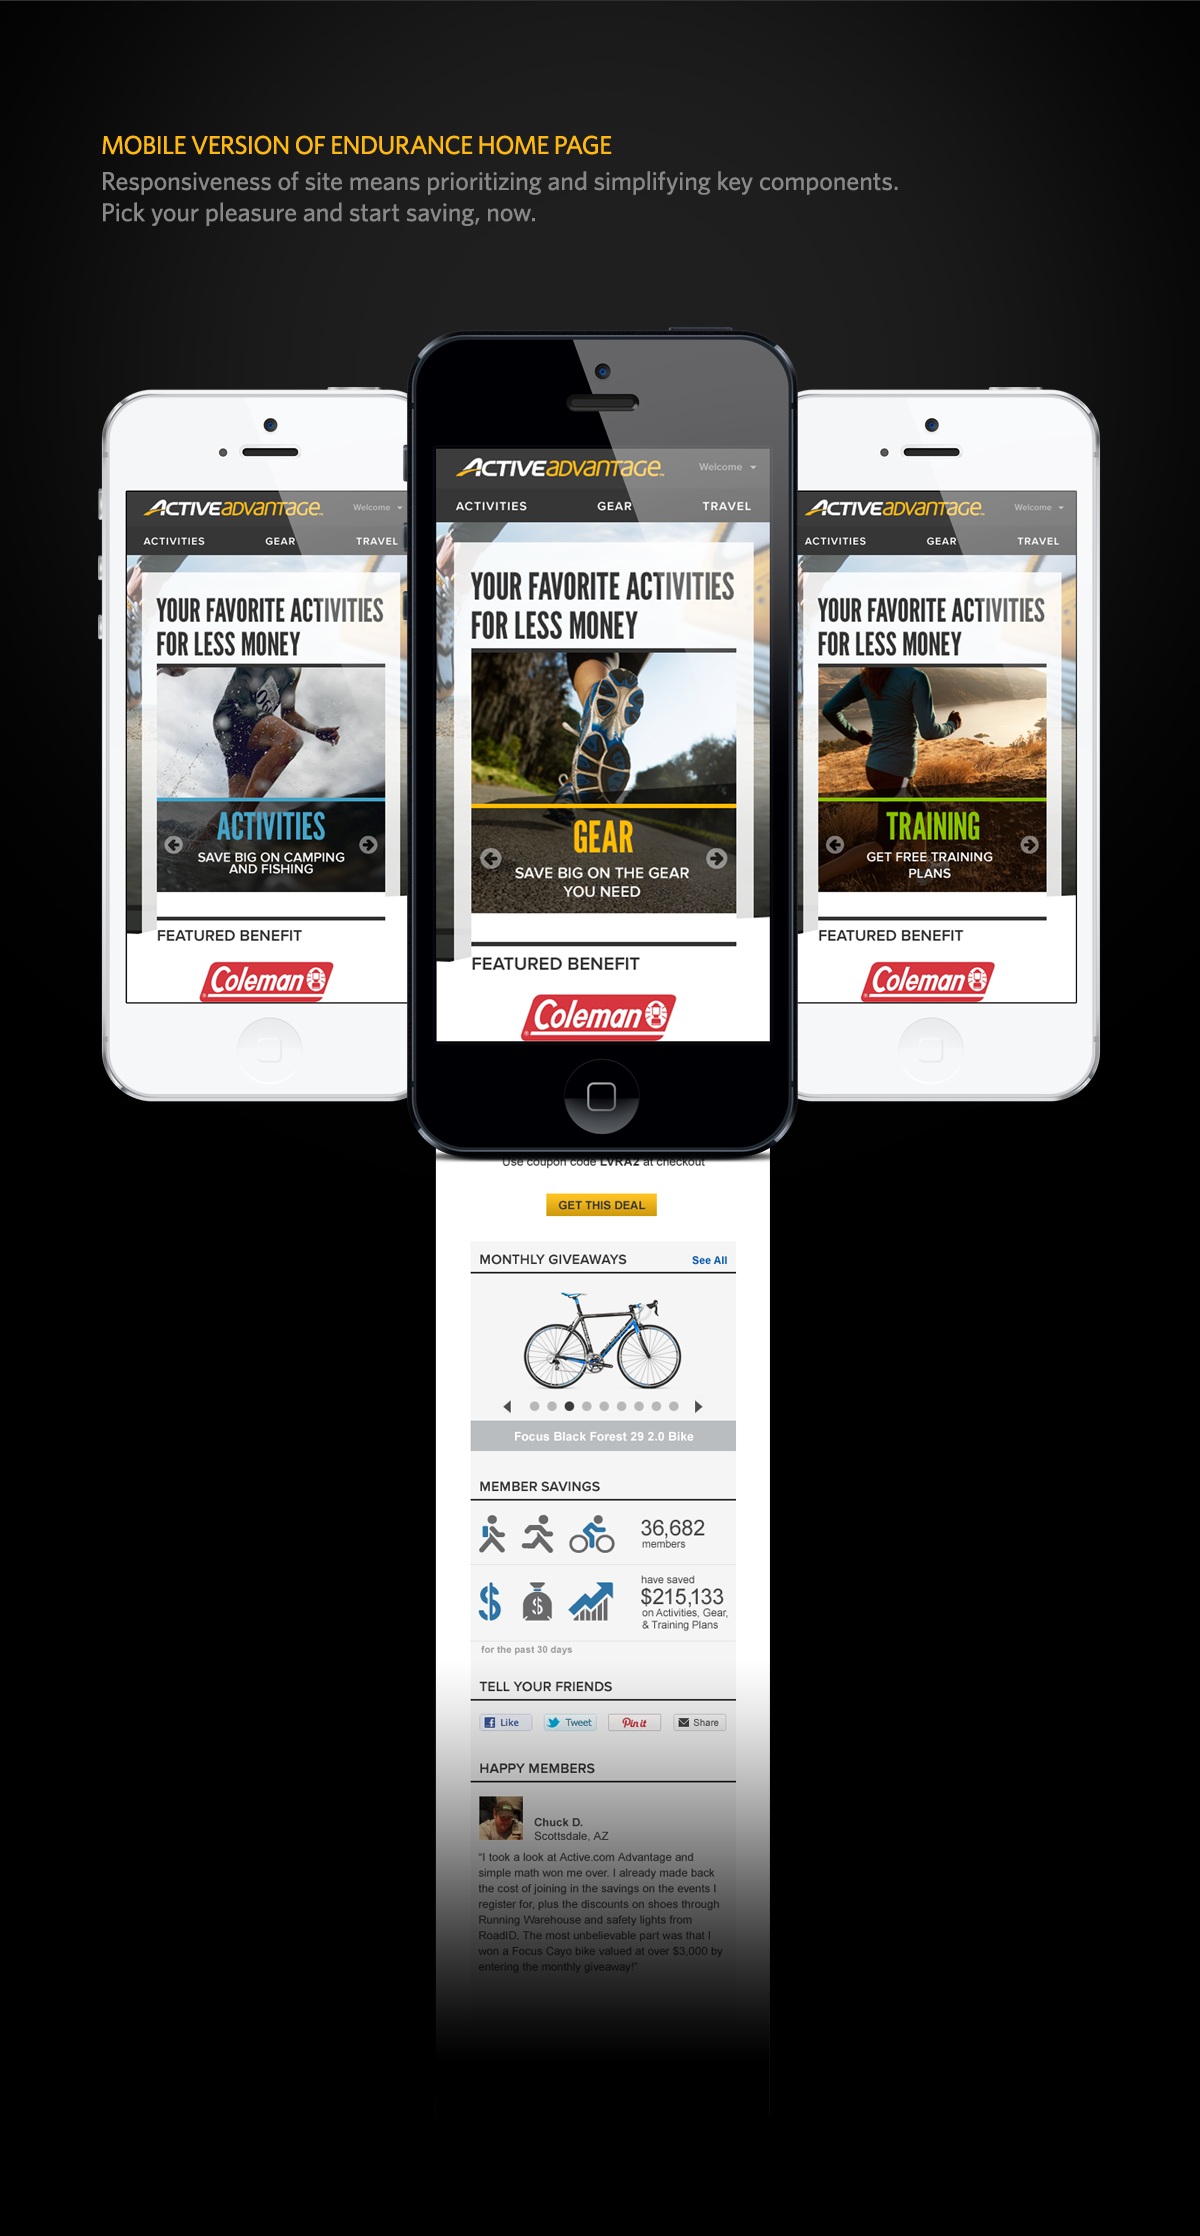 Endurance site Outdoors site Webdesign Active camping fishing hiking canoeing branding 